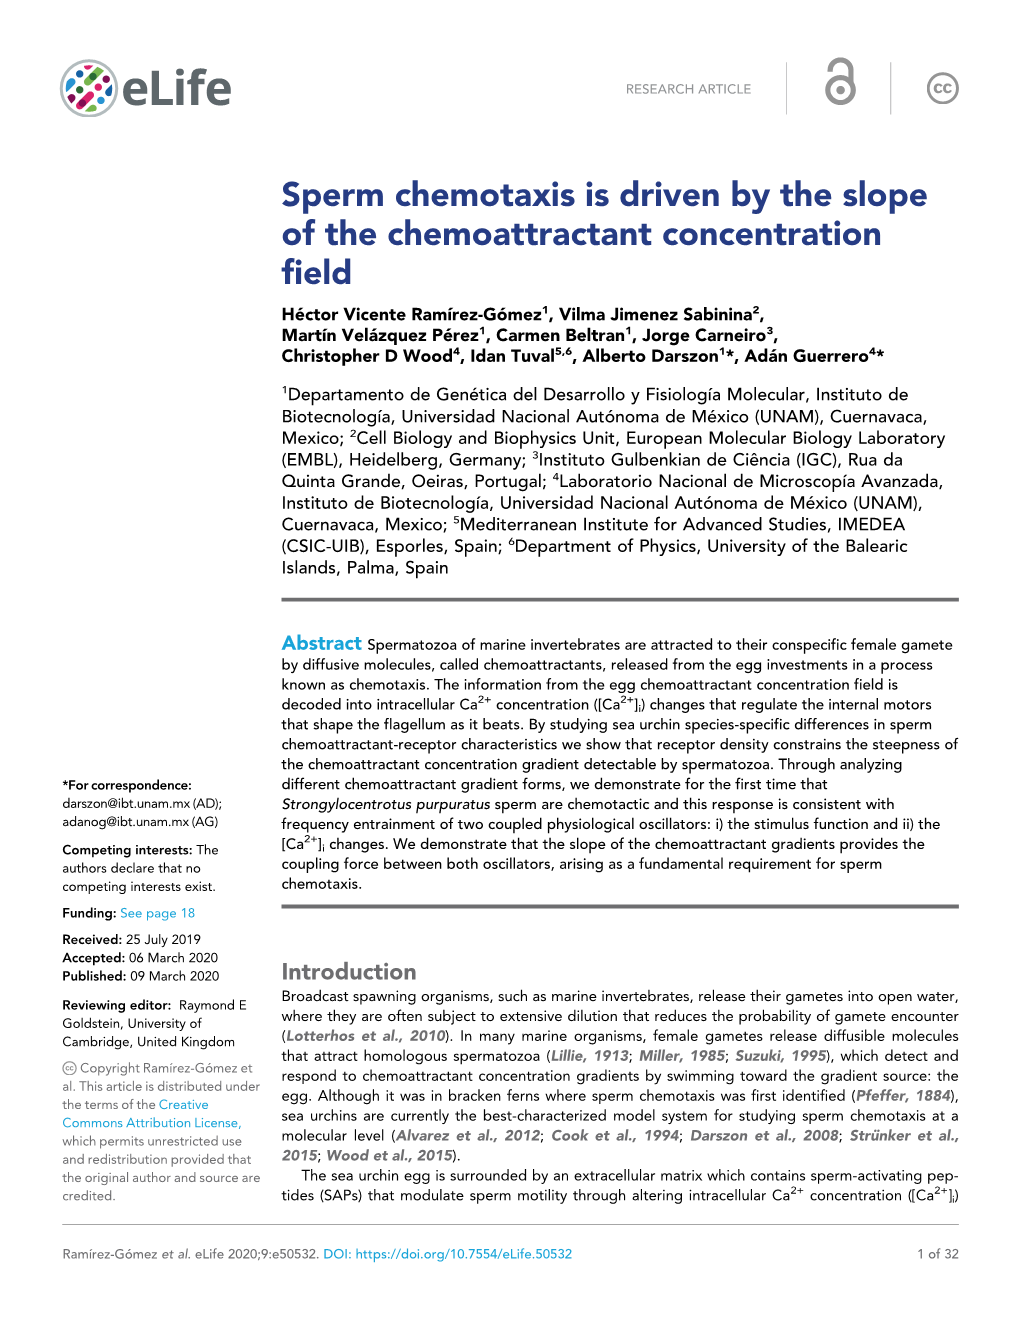 Sperm Chemotaxis Is Driven by the Slope of the Chemoattractant